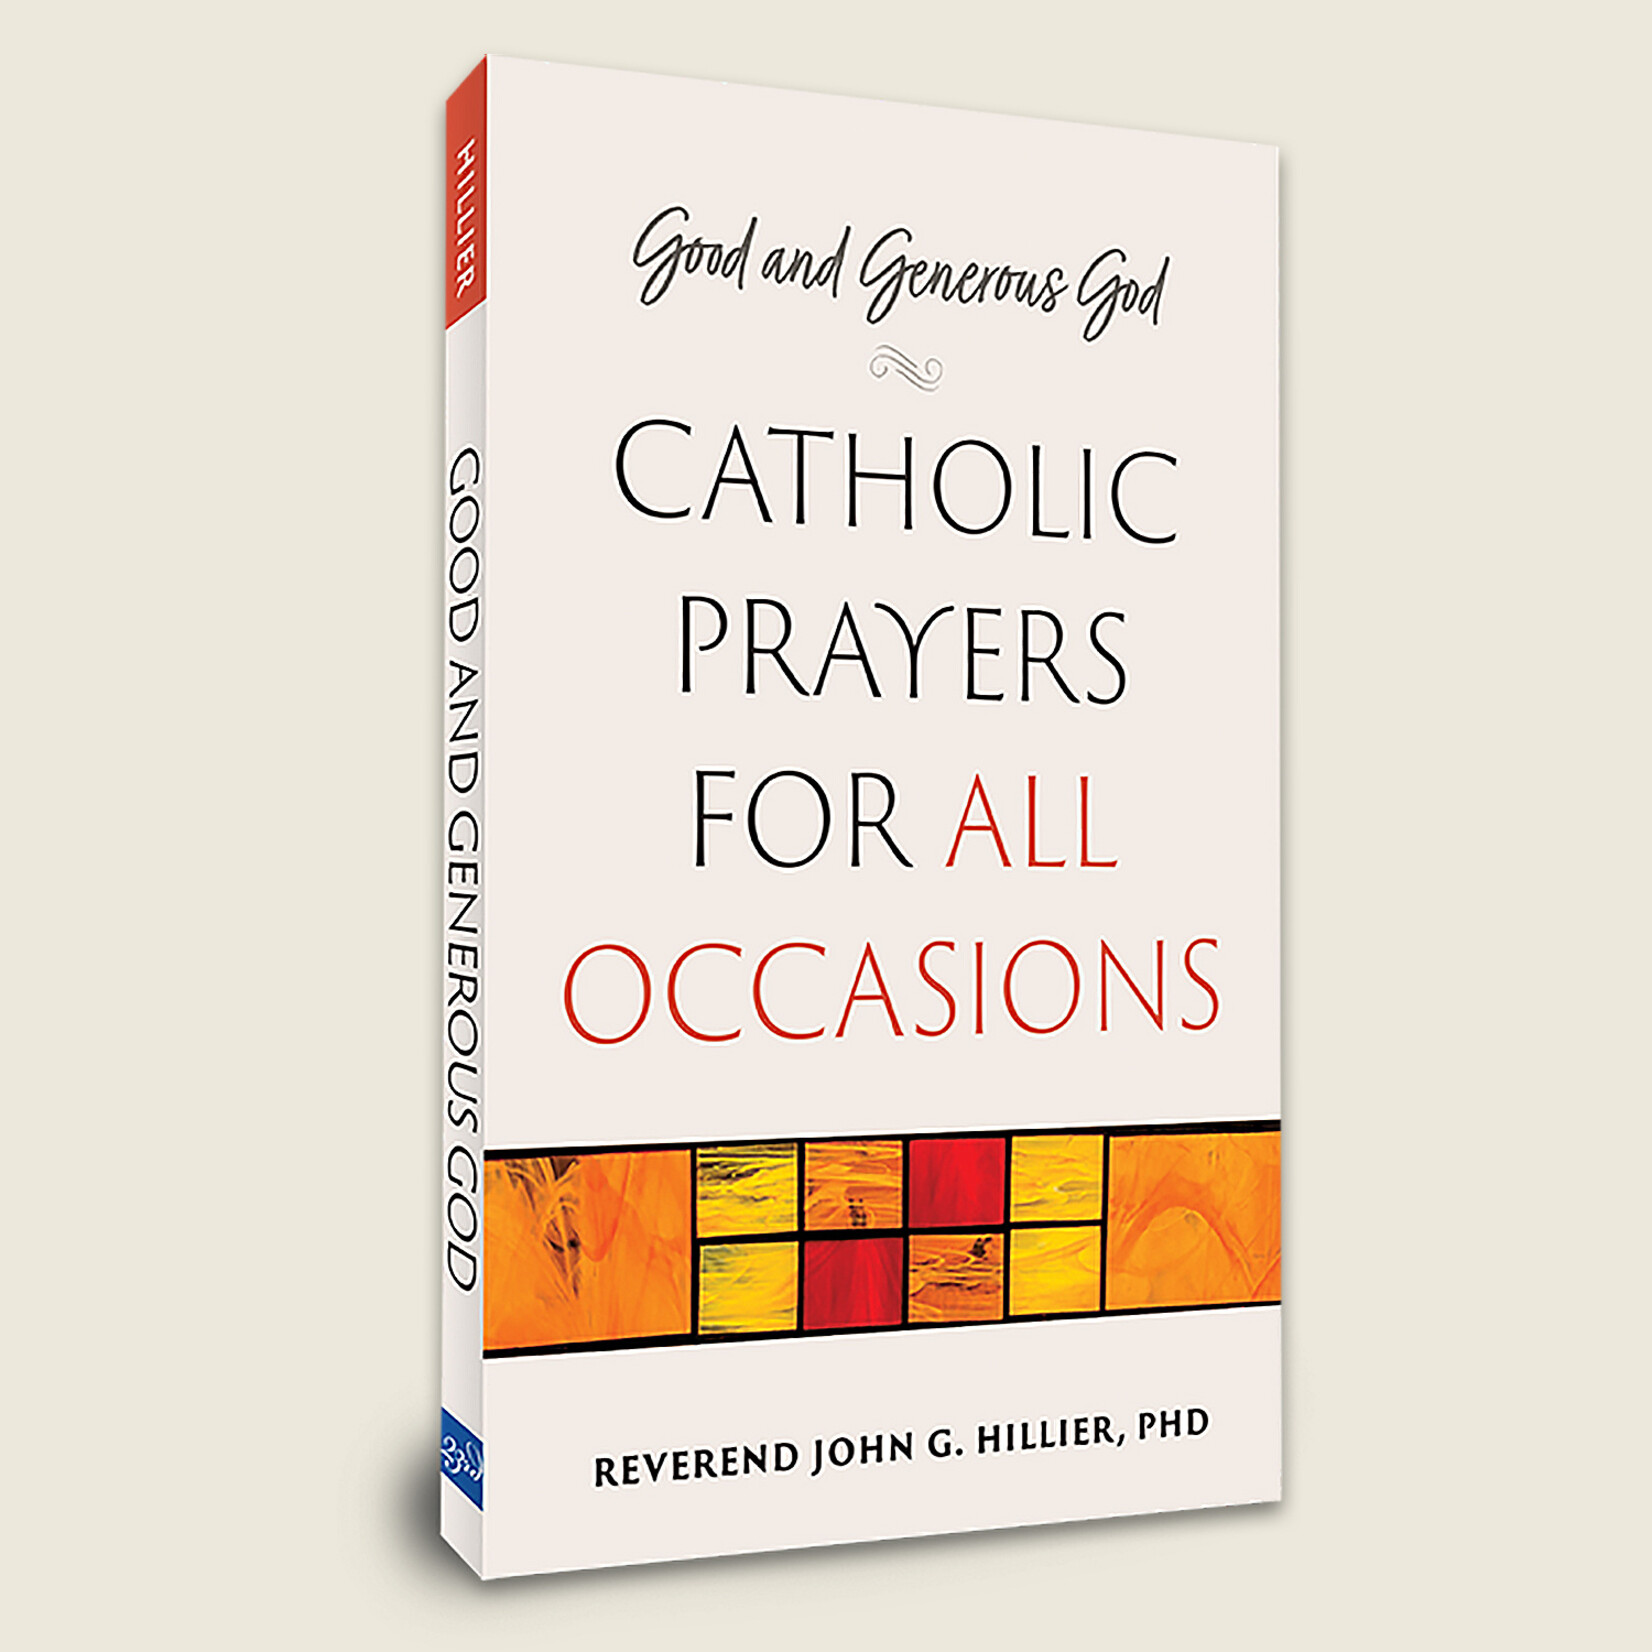 Catholic Prayers For All Occasions